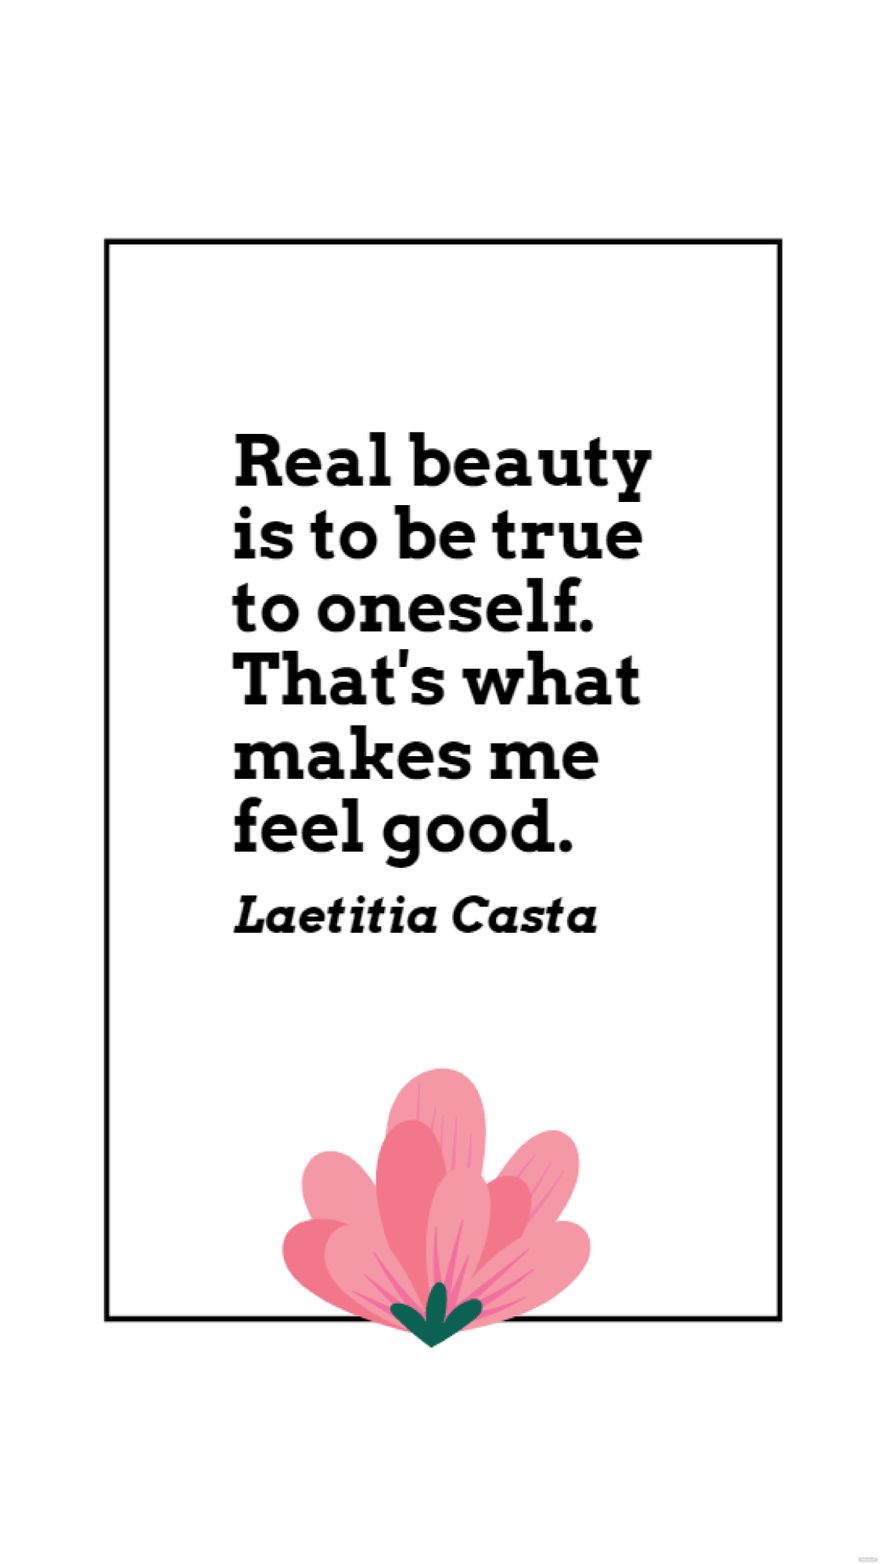 Laetitia Casta - Real beauty is to be true to oneself. That's what makes me feel good.